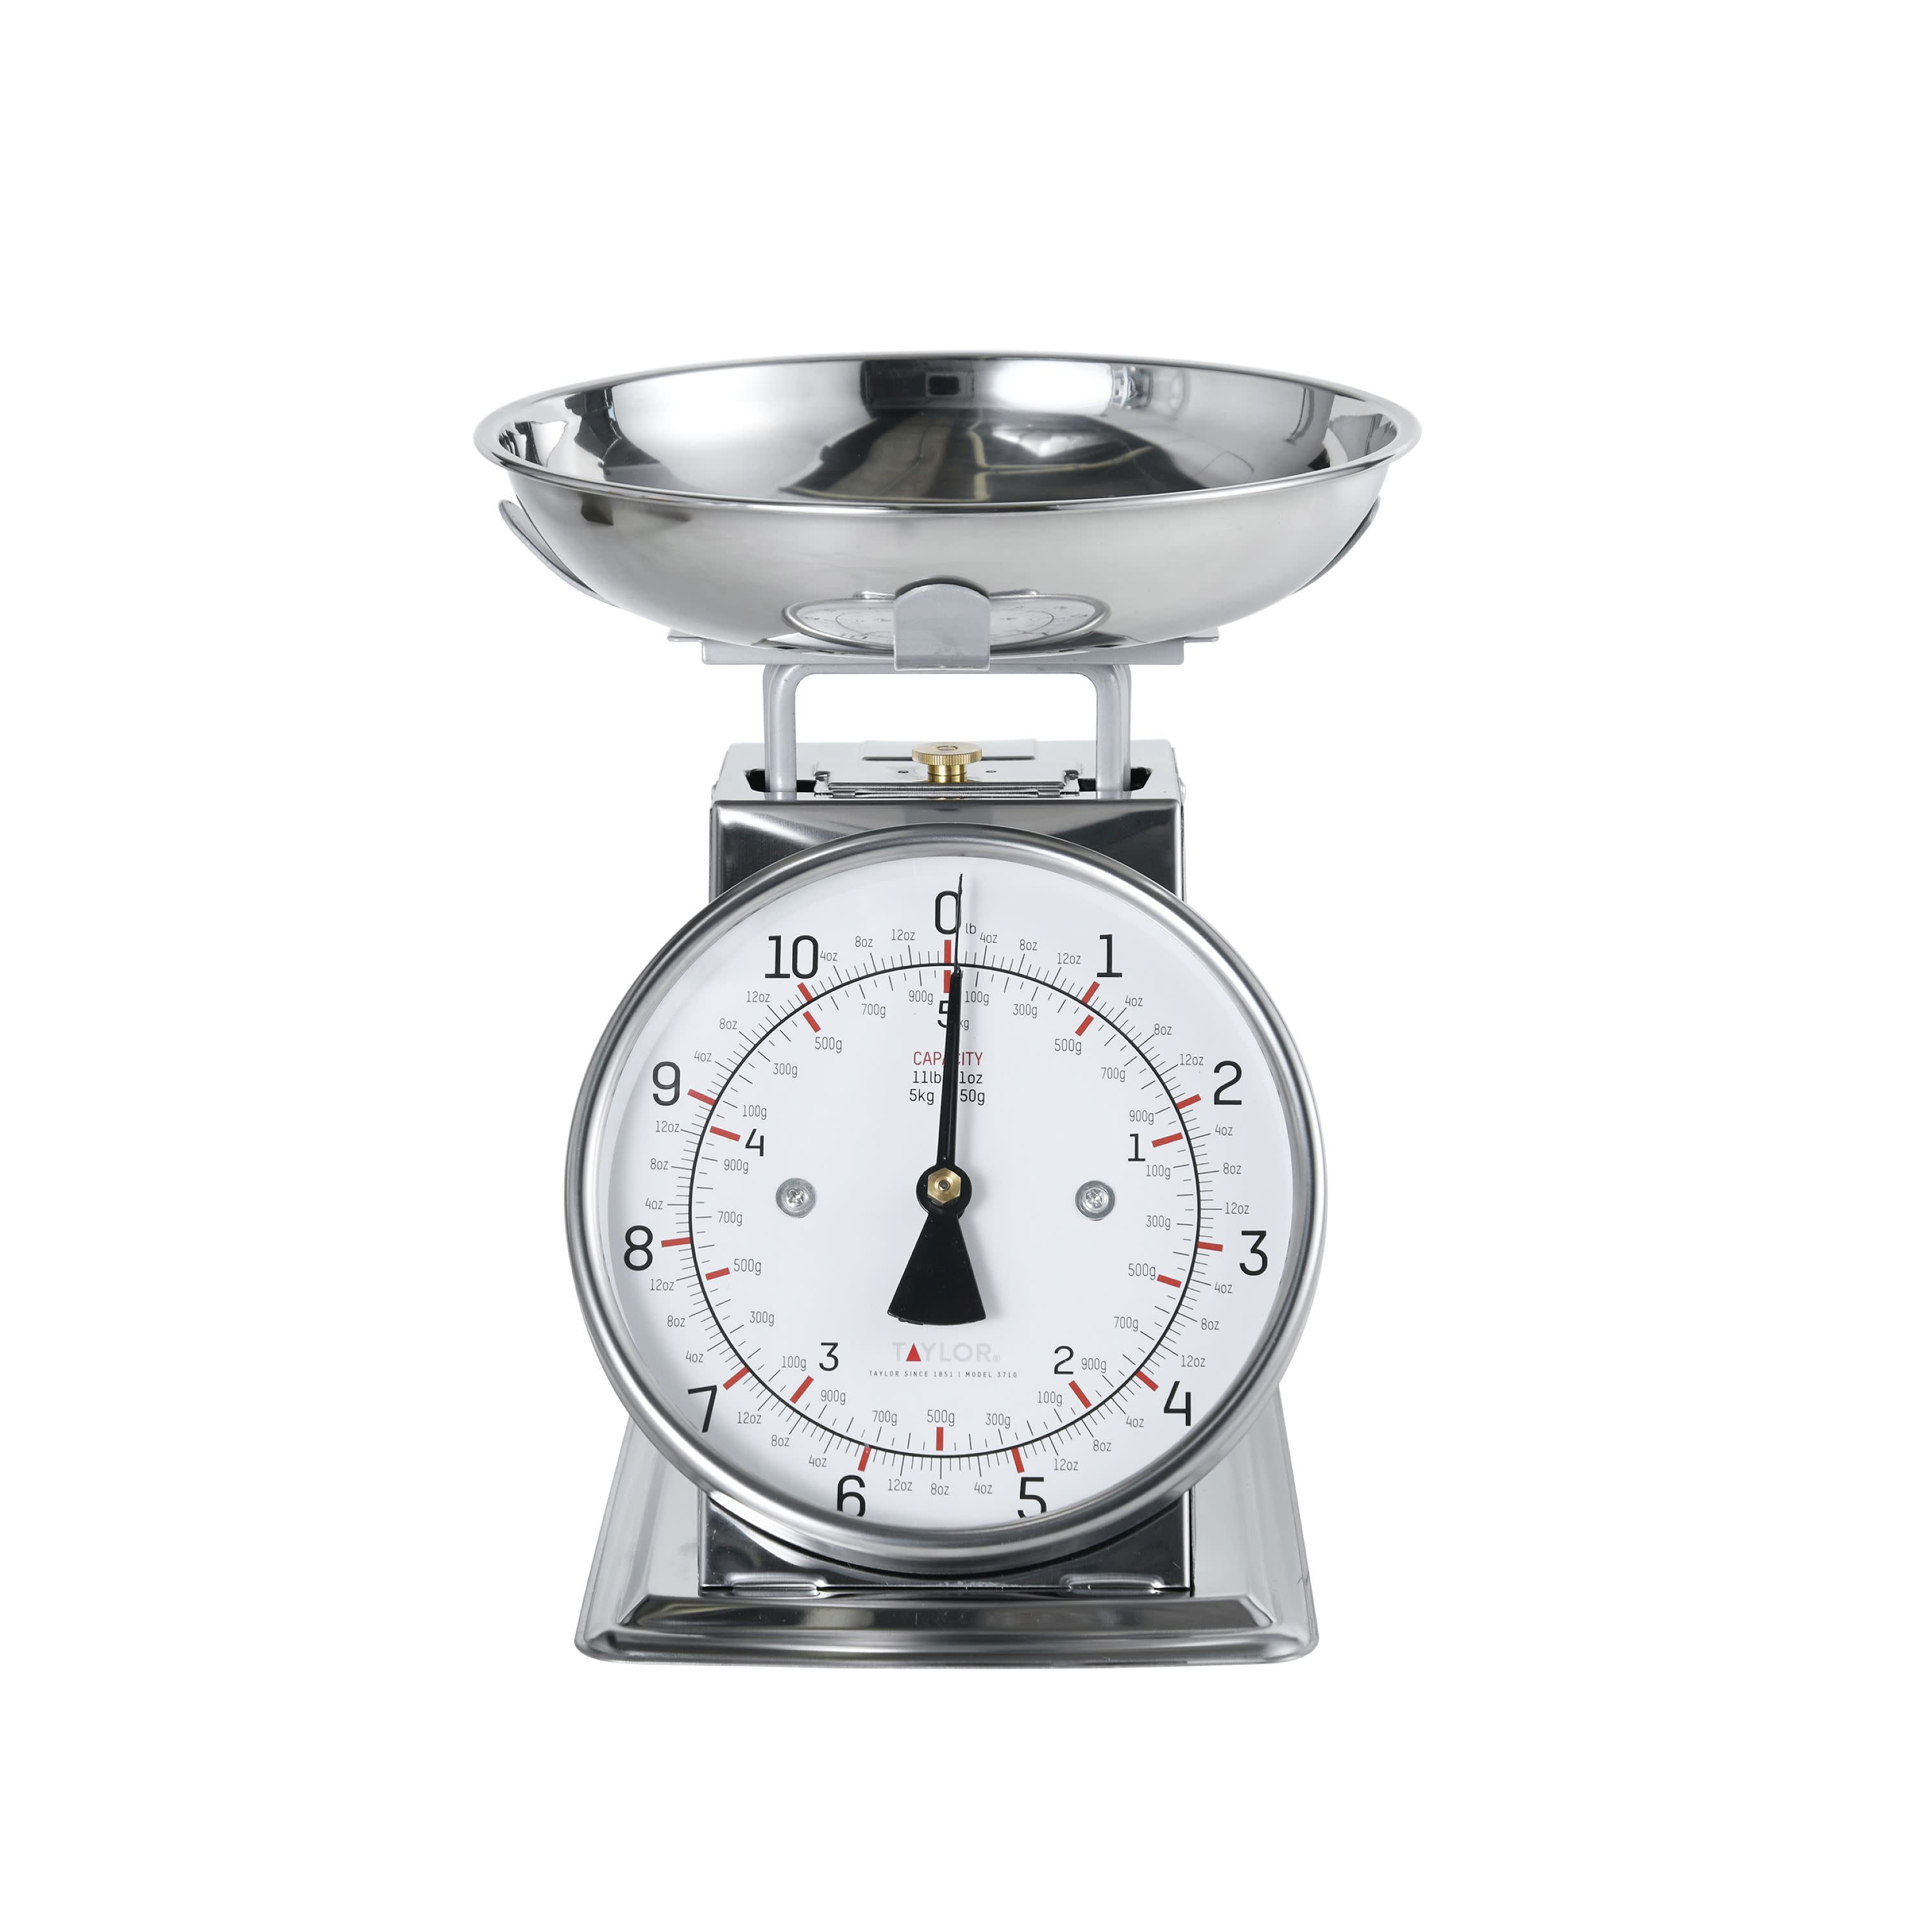 22lb Platform Scale Dial Kitchen Home Scale Stainless Steel Bowl Produce Food 